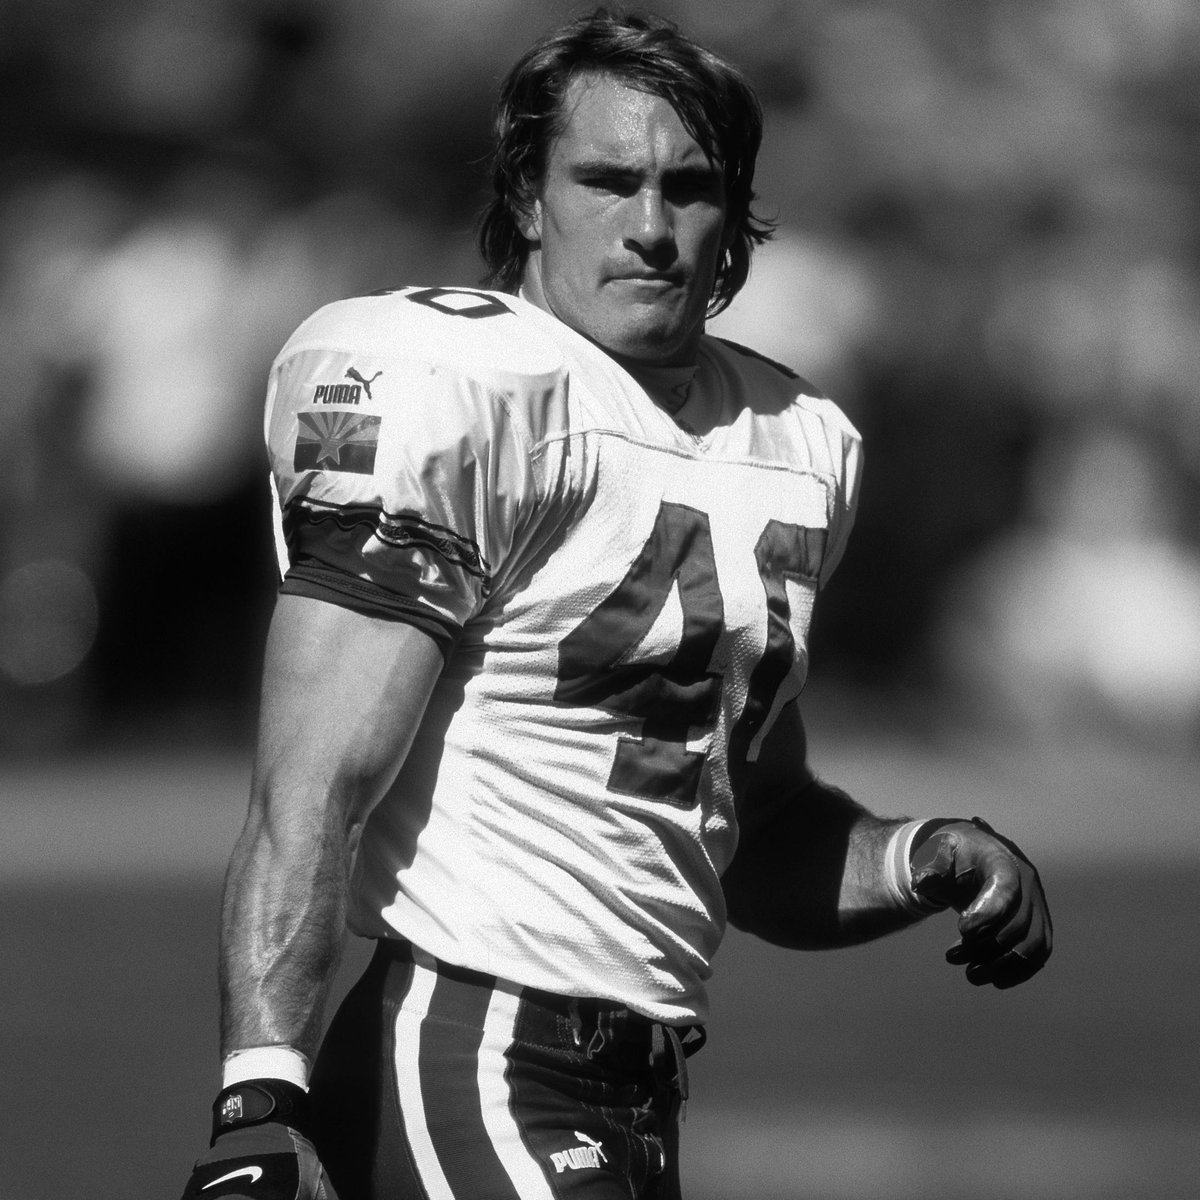 Pat Tillman would’ve turned 45 today. Let’s all remember a hero.